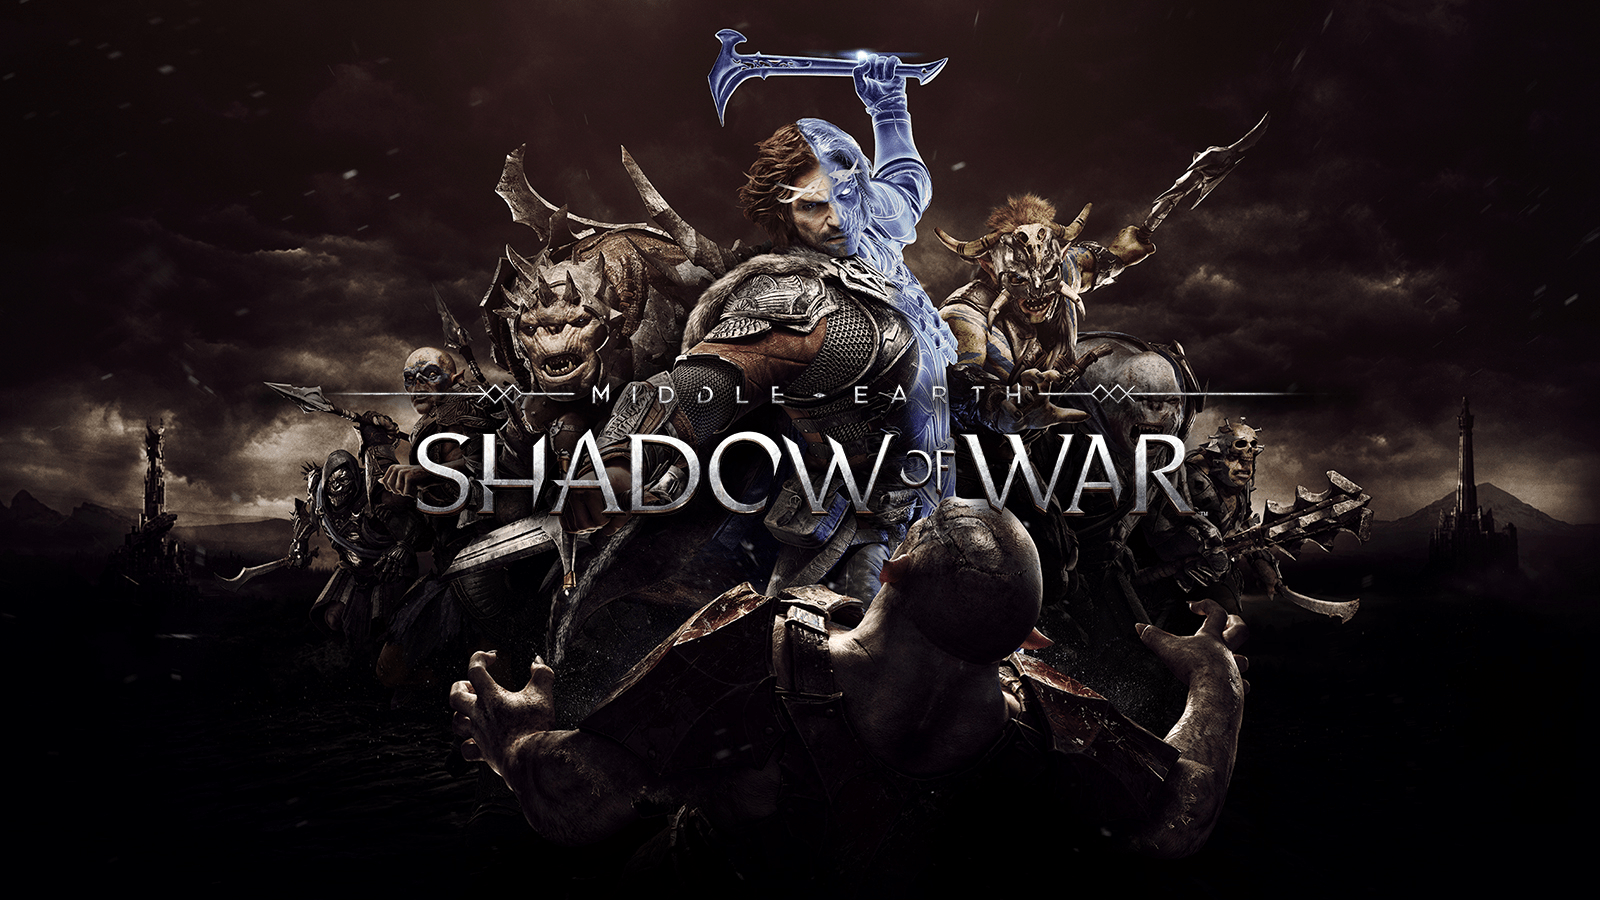 The Art of Middle-Earth Shadow of Mordor - Art Book